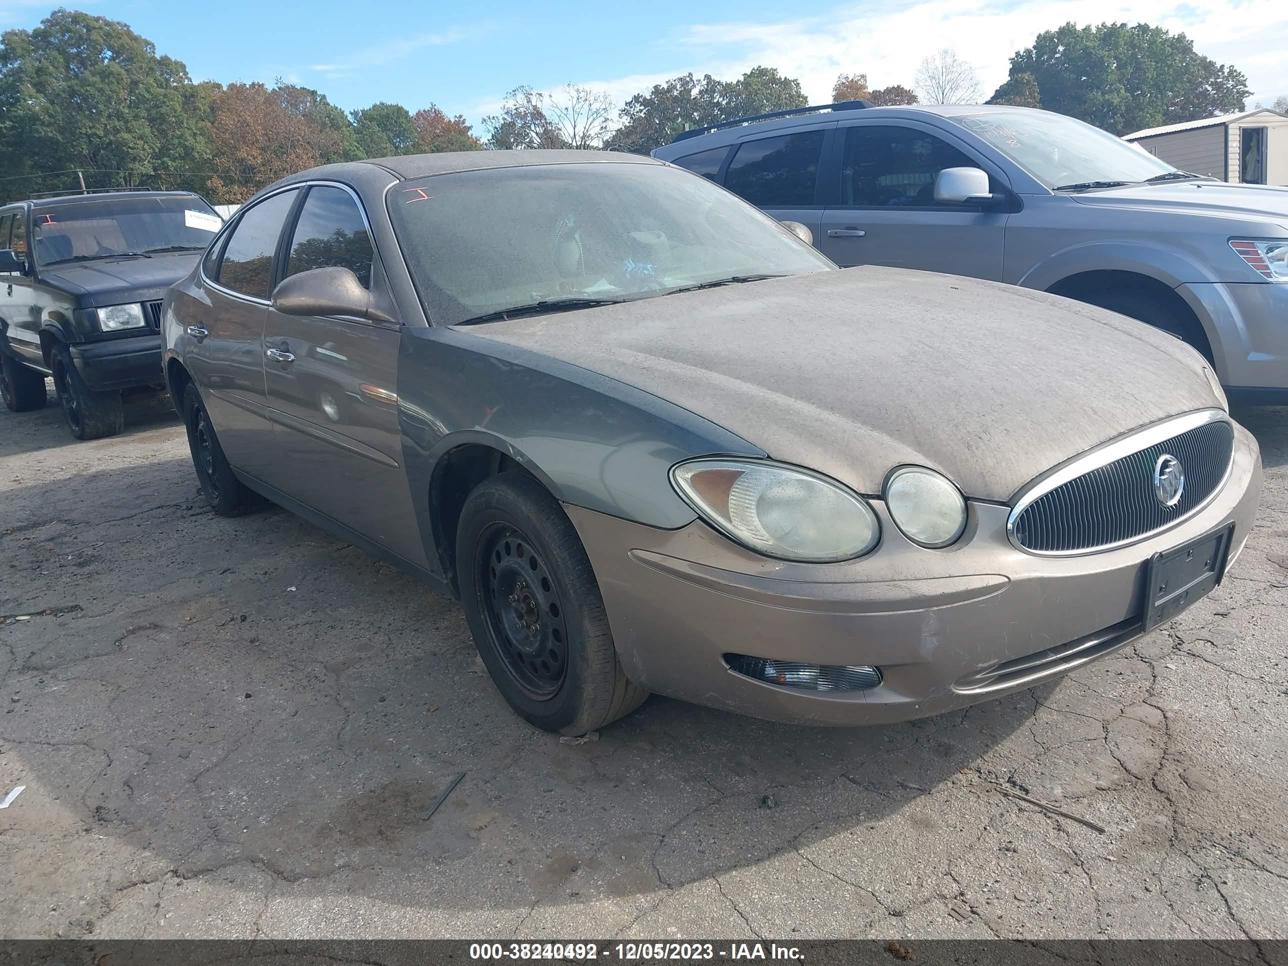 vin: 2G4WC582461254310 2G4WC582461254310 2006 buick lacrosse 3800 for Sale in 30260, 1930 Rex Road, Lake City, USA